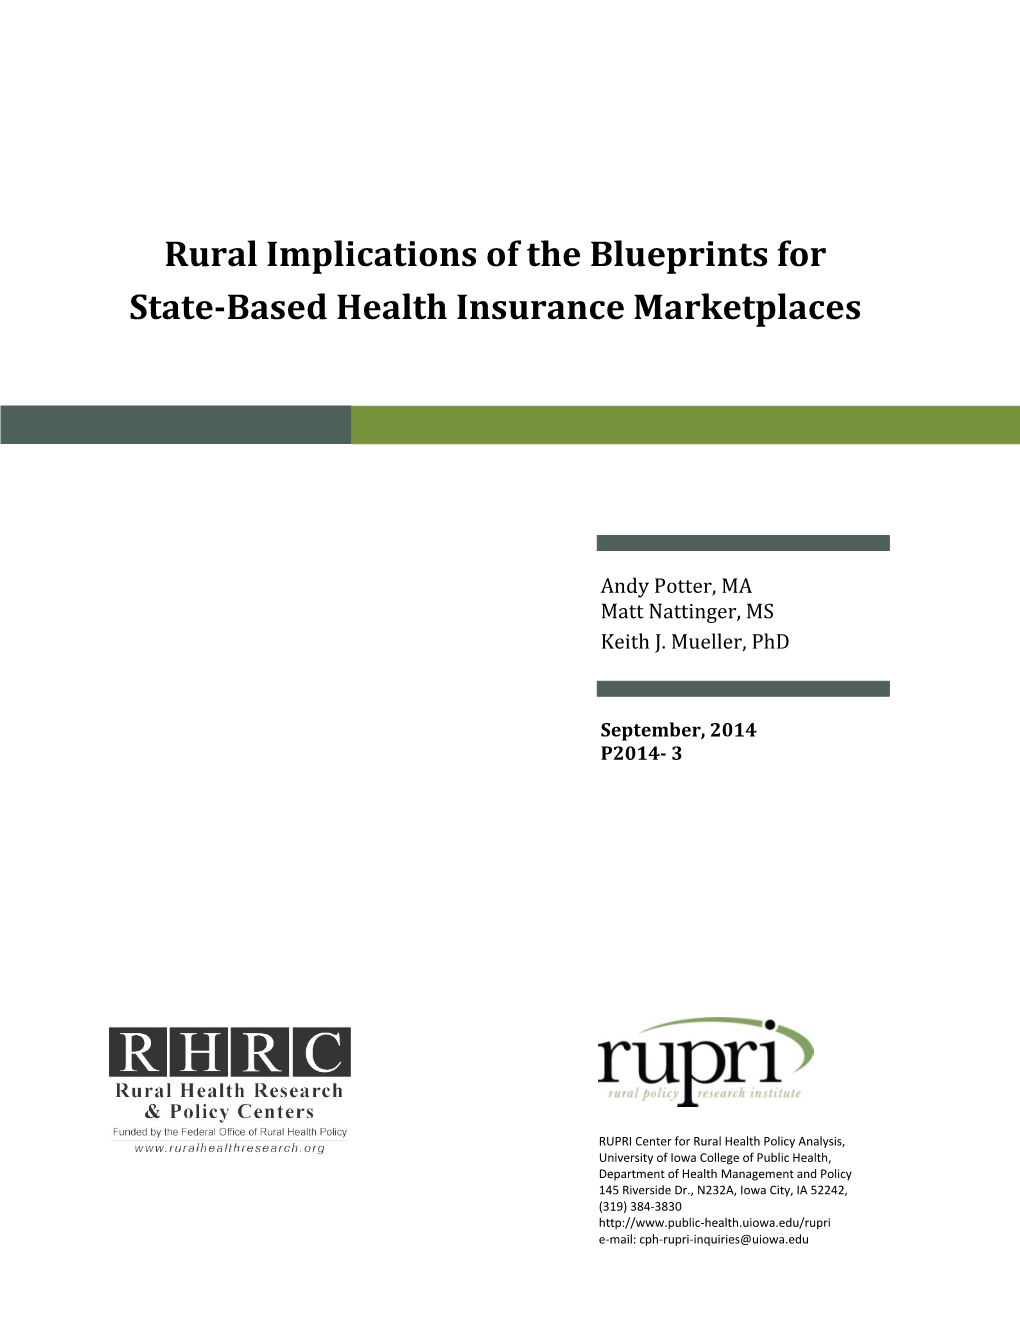 Rural Implications of the Blueprints for State-Based Health Insurance Marketplaces